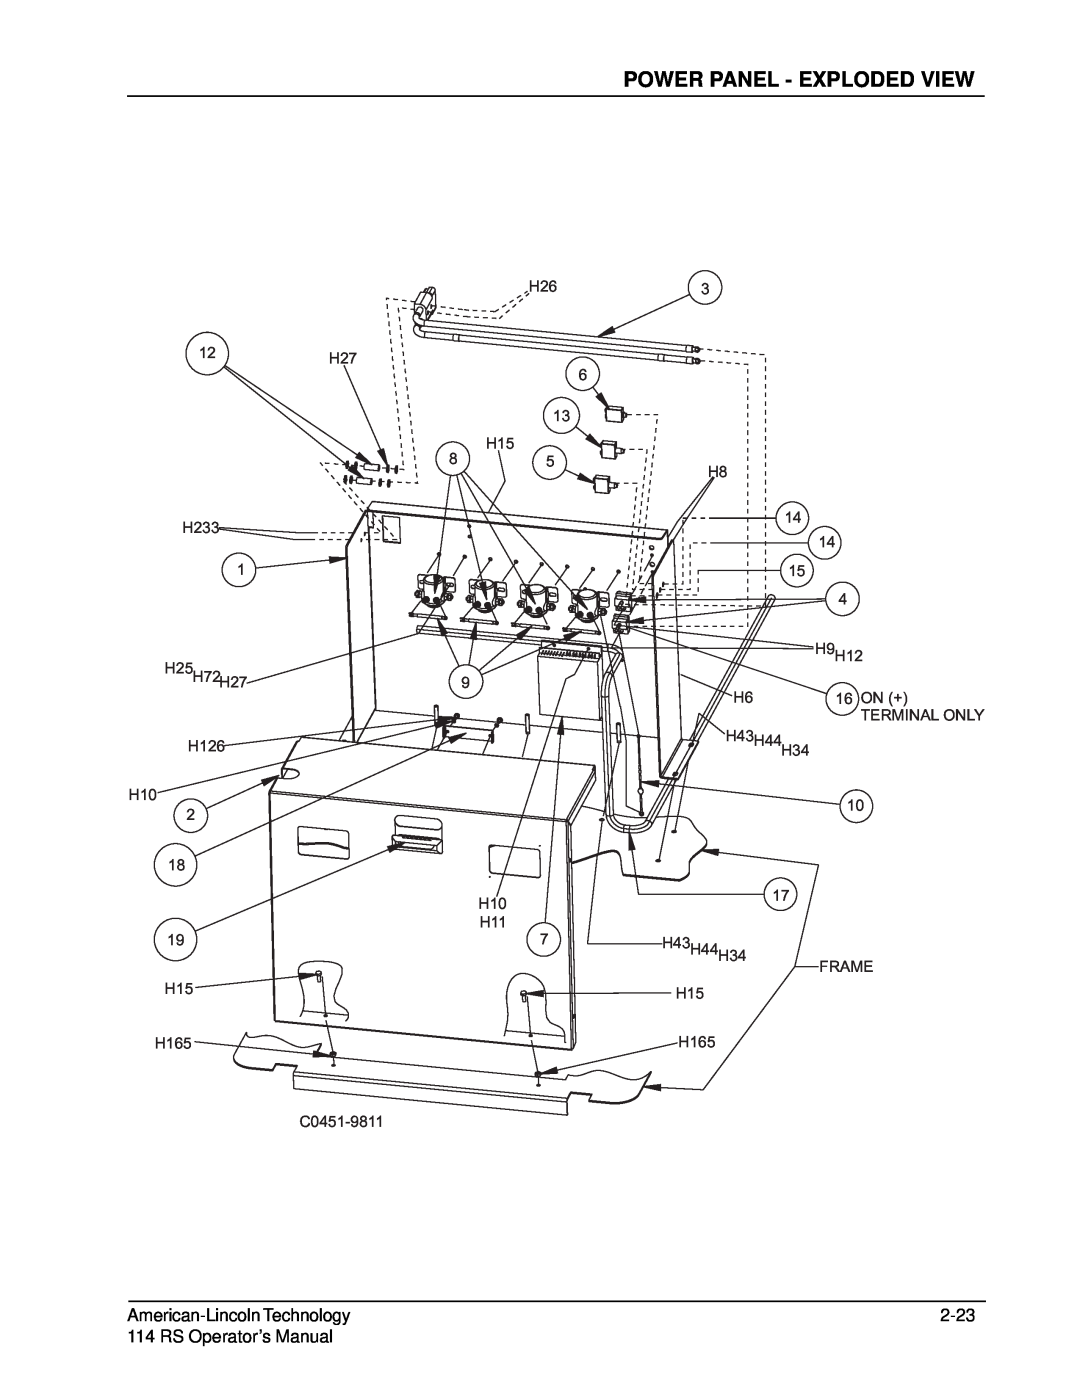 Nilfisk-ALTO 114RS SWEEPER manual Power Panel - Exploded View, American-LincolnTechnology, 2-23, RS Operator’s Manual 